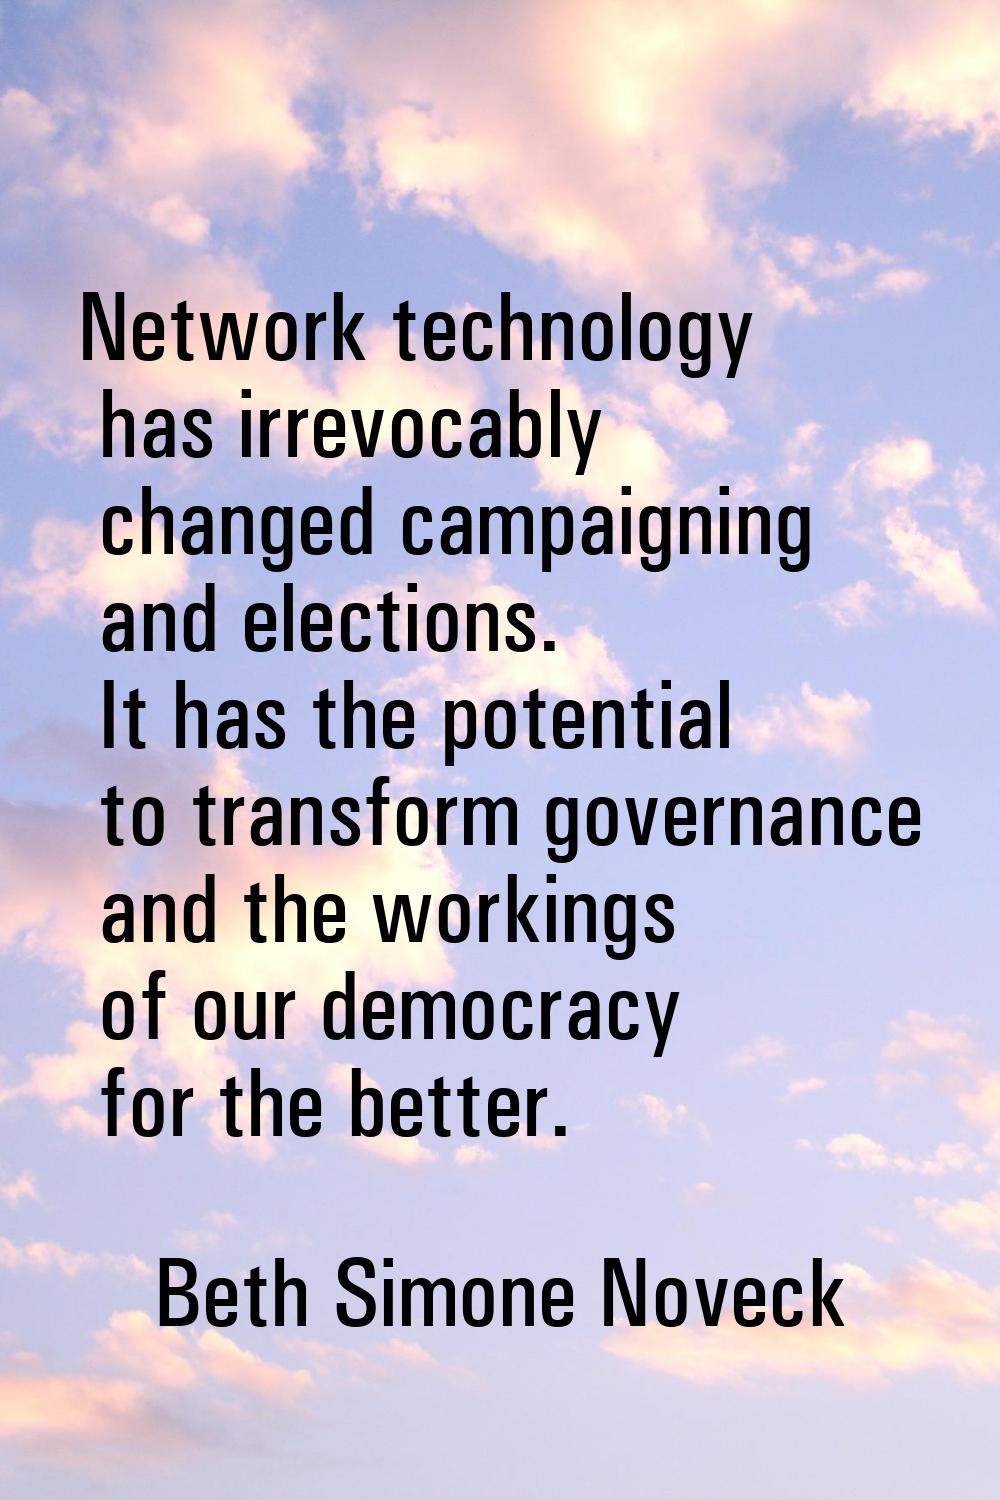 Network technology has irrevocably changed campaigning and elections. It has the potential to trans